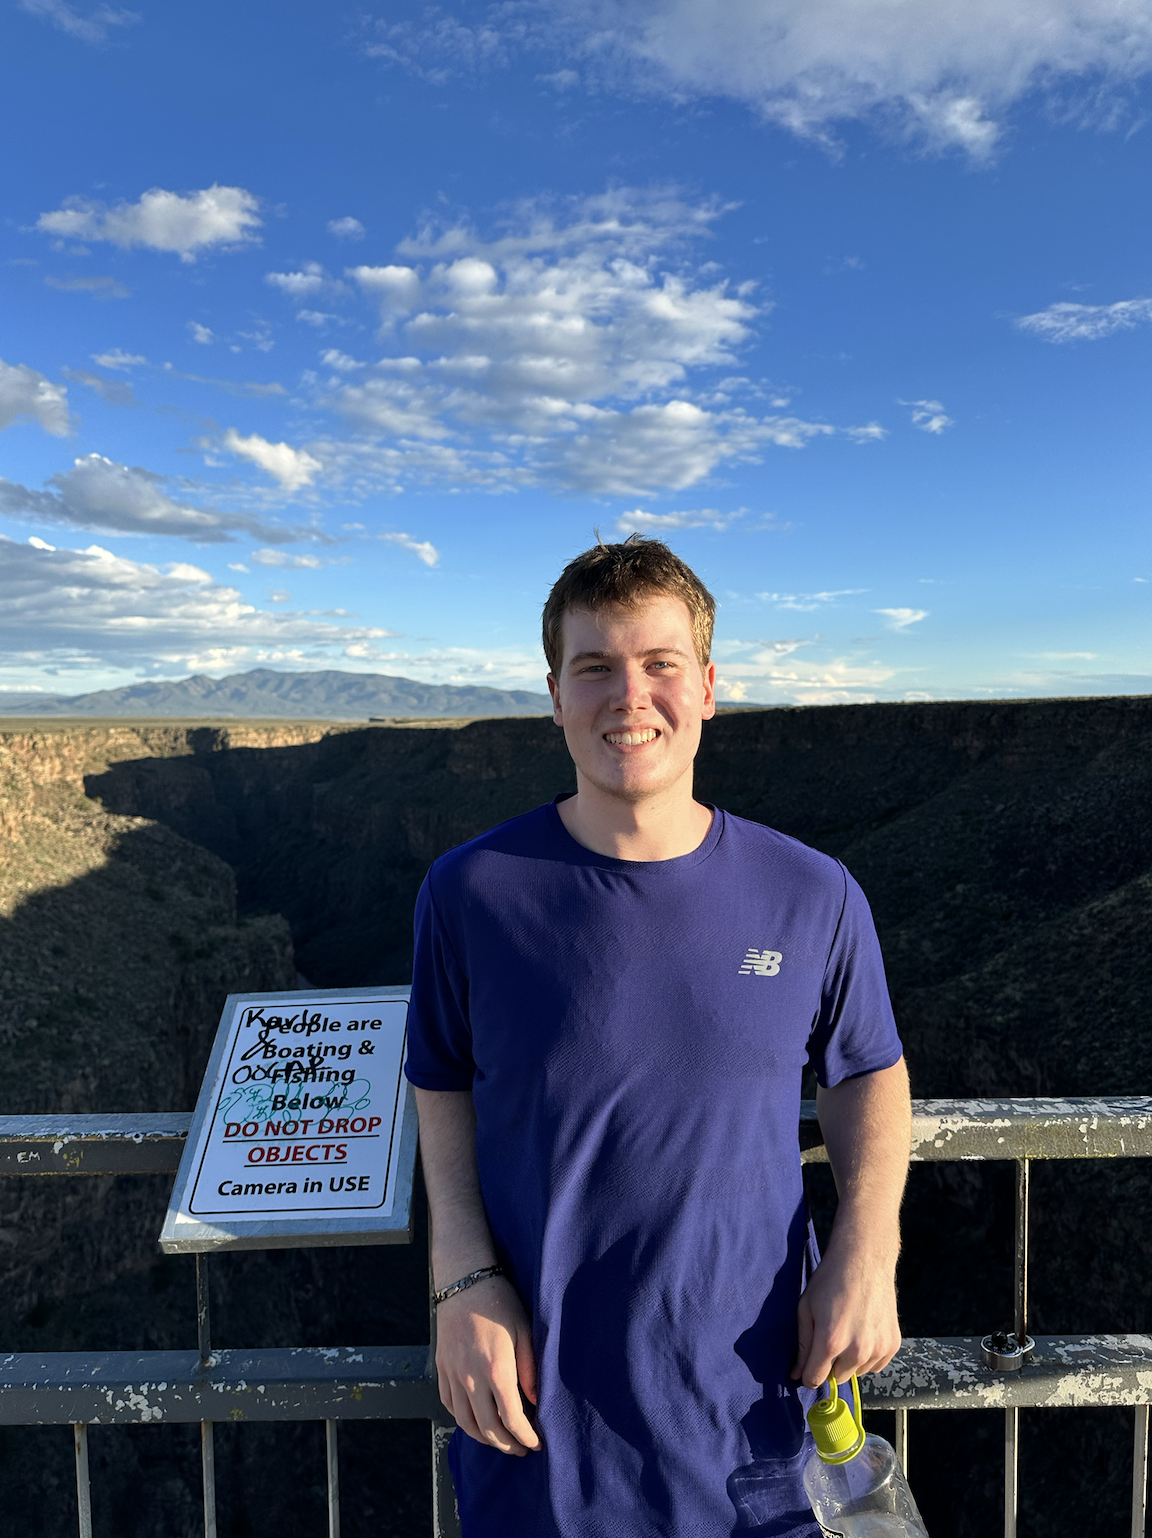 SMU-in-Taos student Nate Stelling stops on the bridge across the Rio Grande Gorge in Taos, NM.